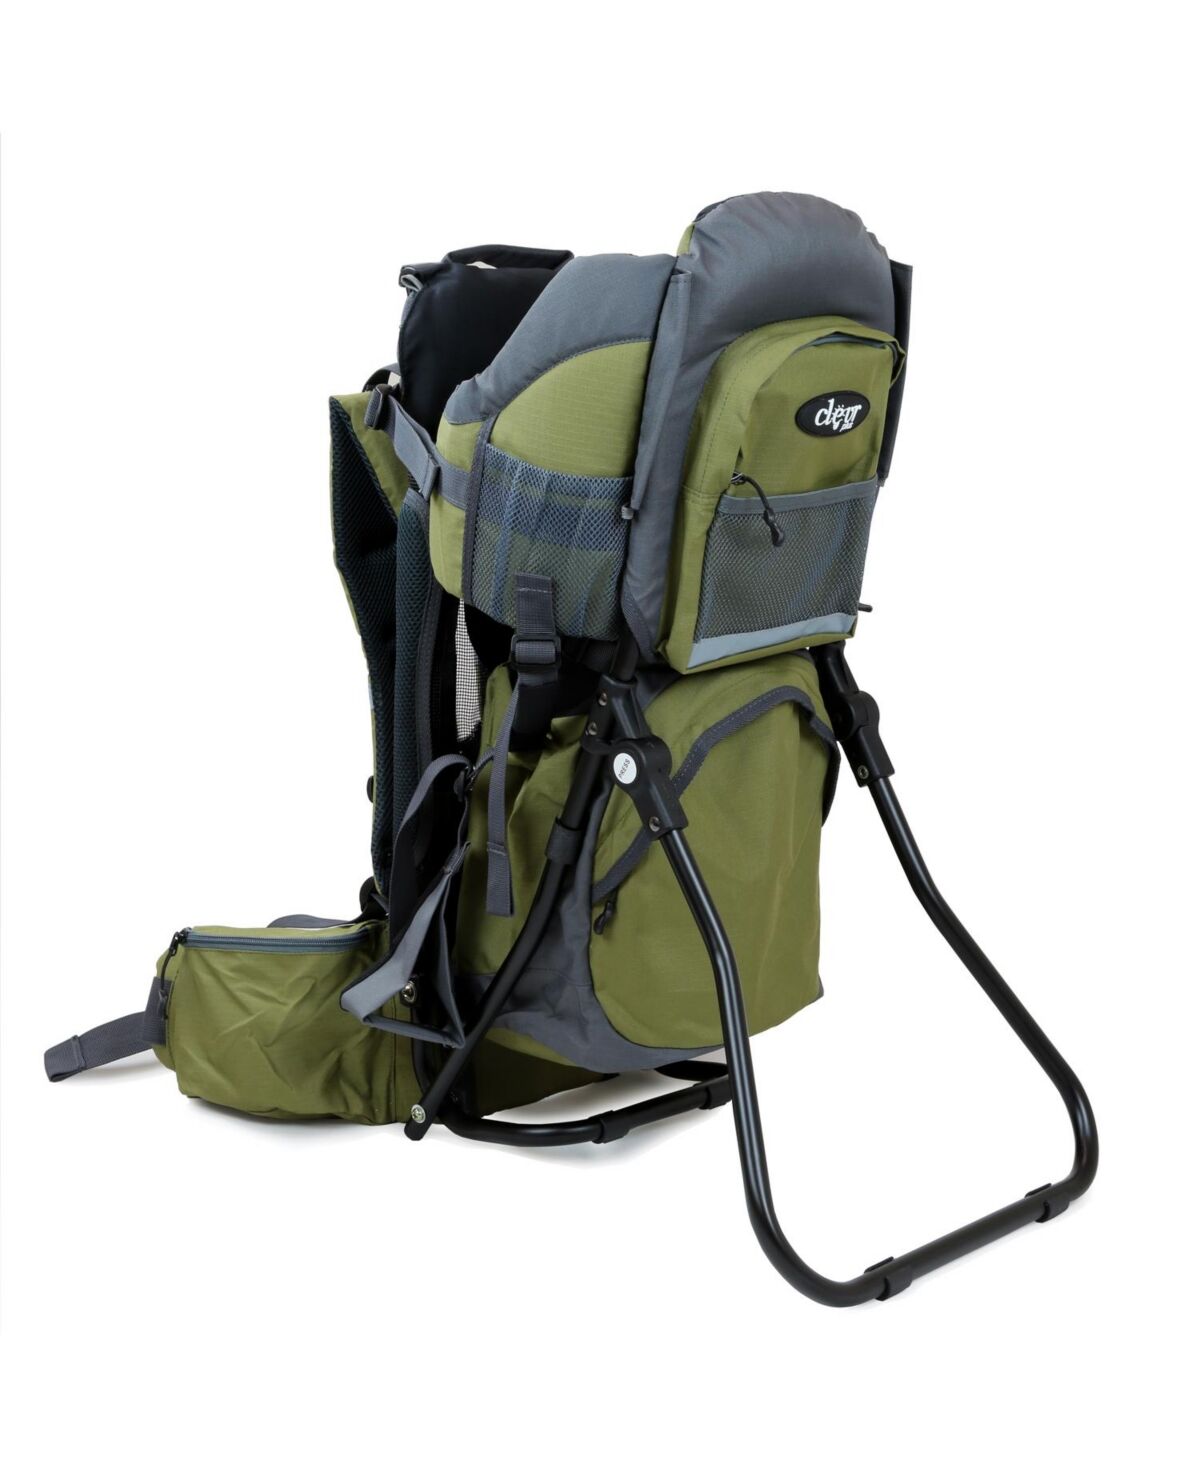 ClevrPlus Canyonero Baby Backpack Kid Toddler Camping Hiking Child Carrier Green - Green